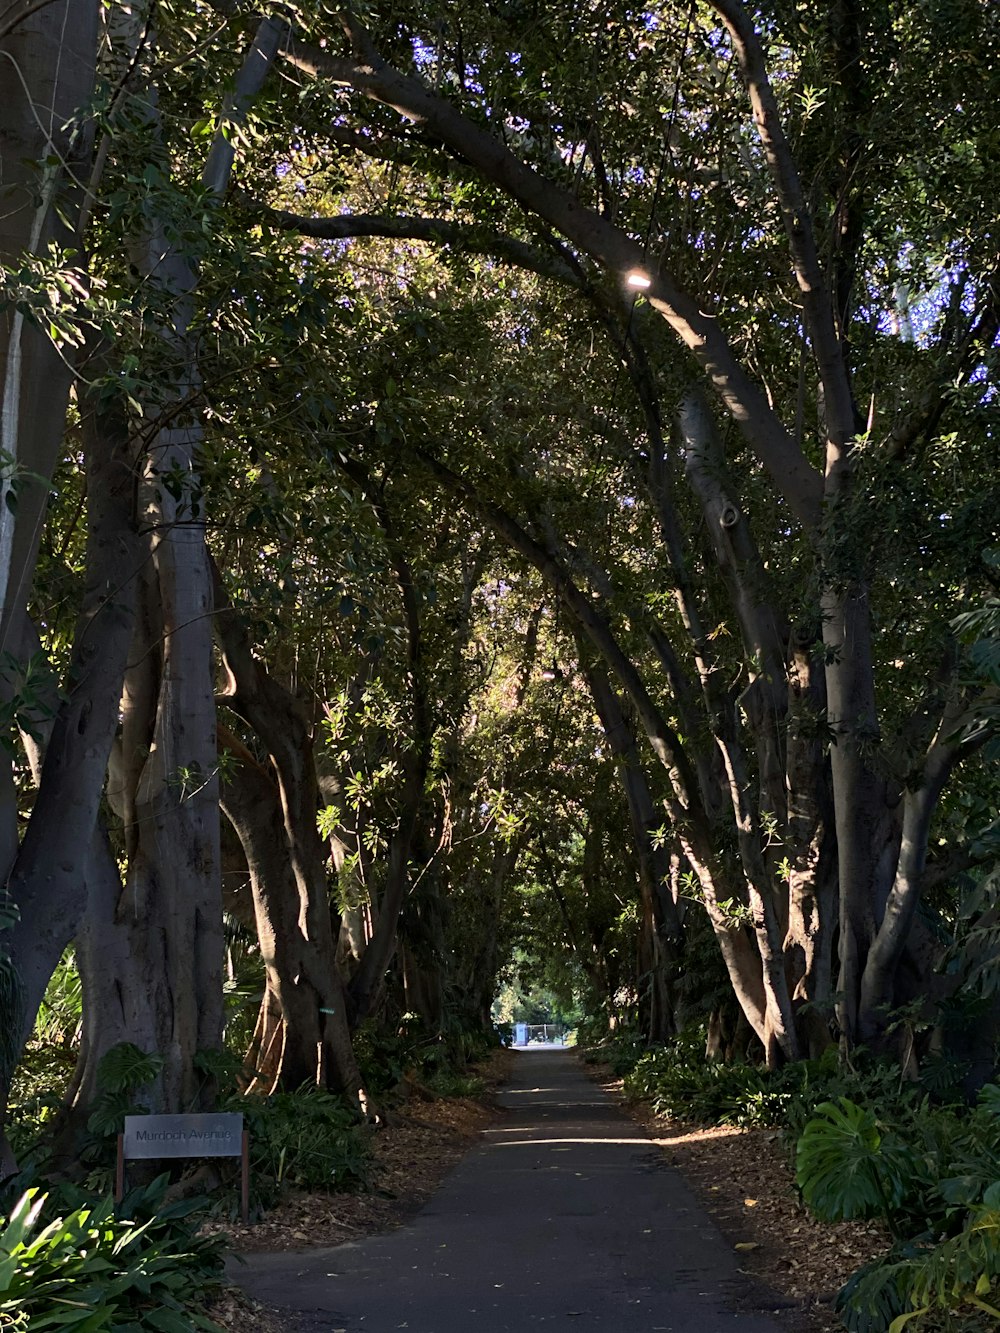 a tree lined road with a sign in the middle